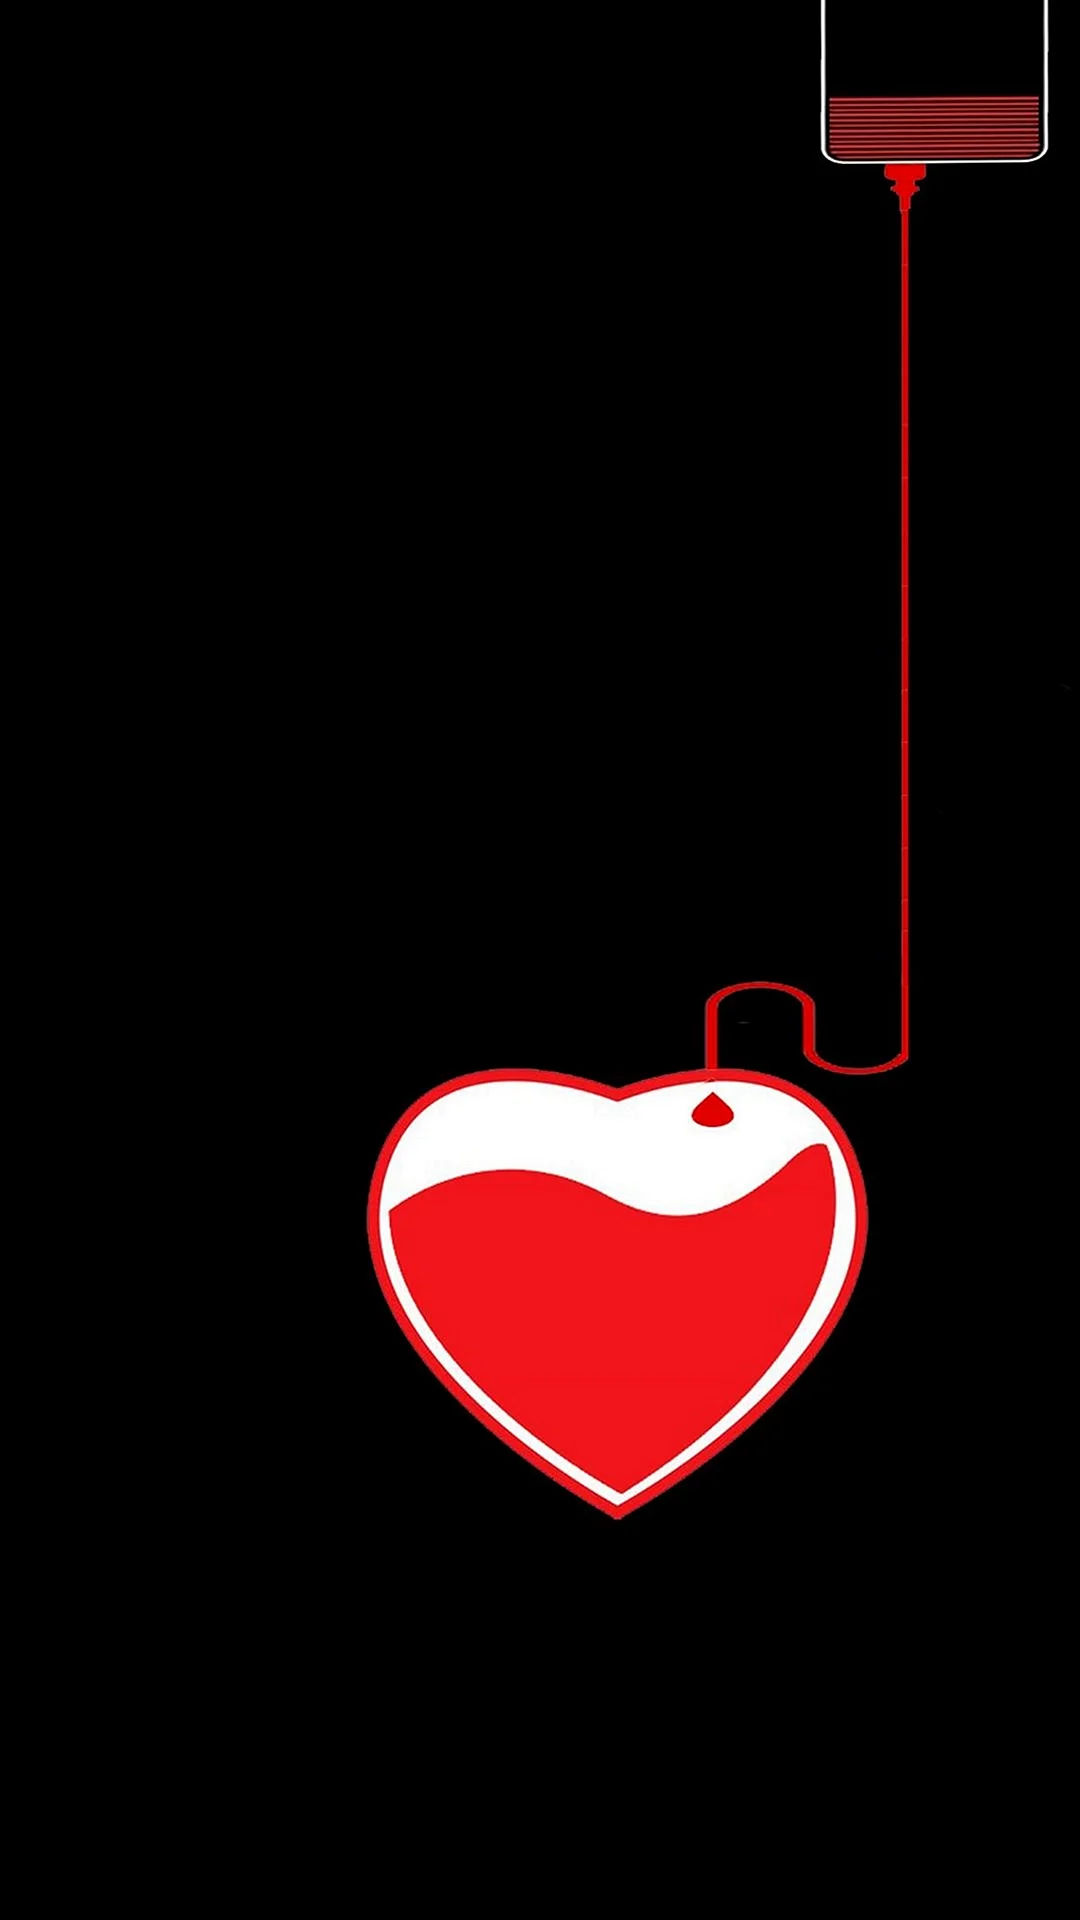 Heart Charging Wallpaper For iPhone